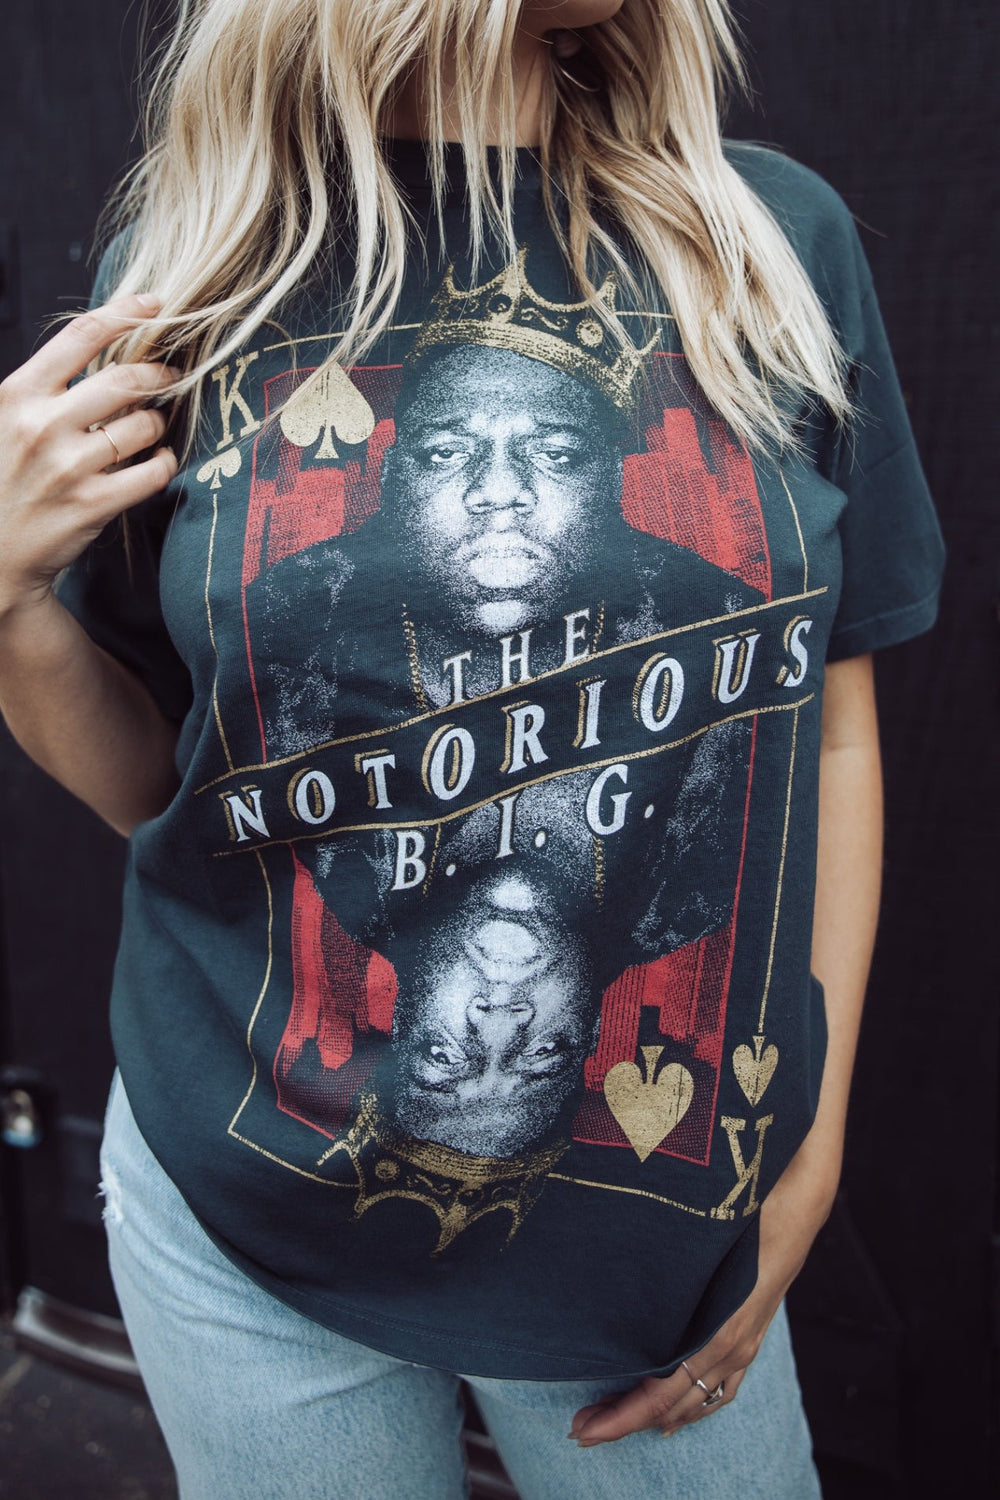 DAYDREAMER LA THE NOTORIOUS B.I.G. KING OF SPADES WEEKEND TEE